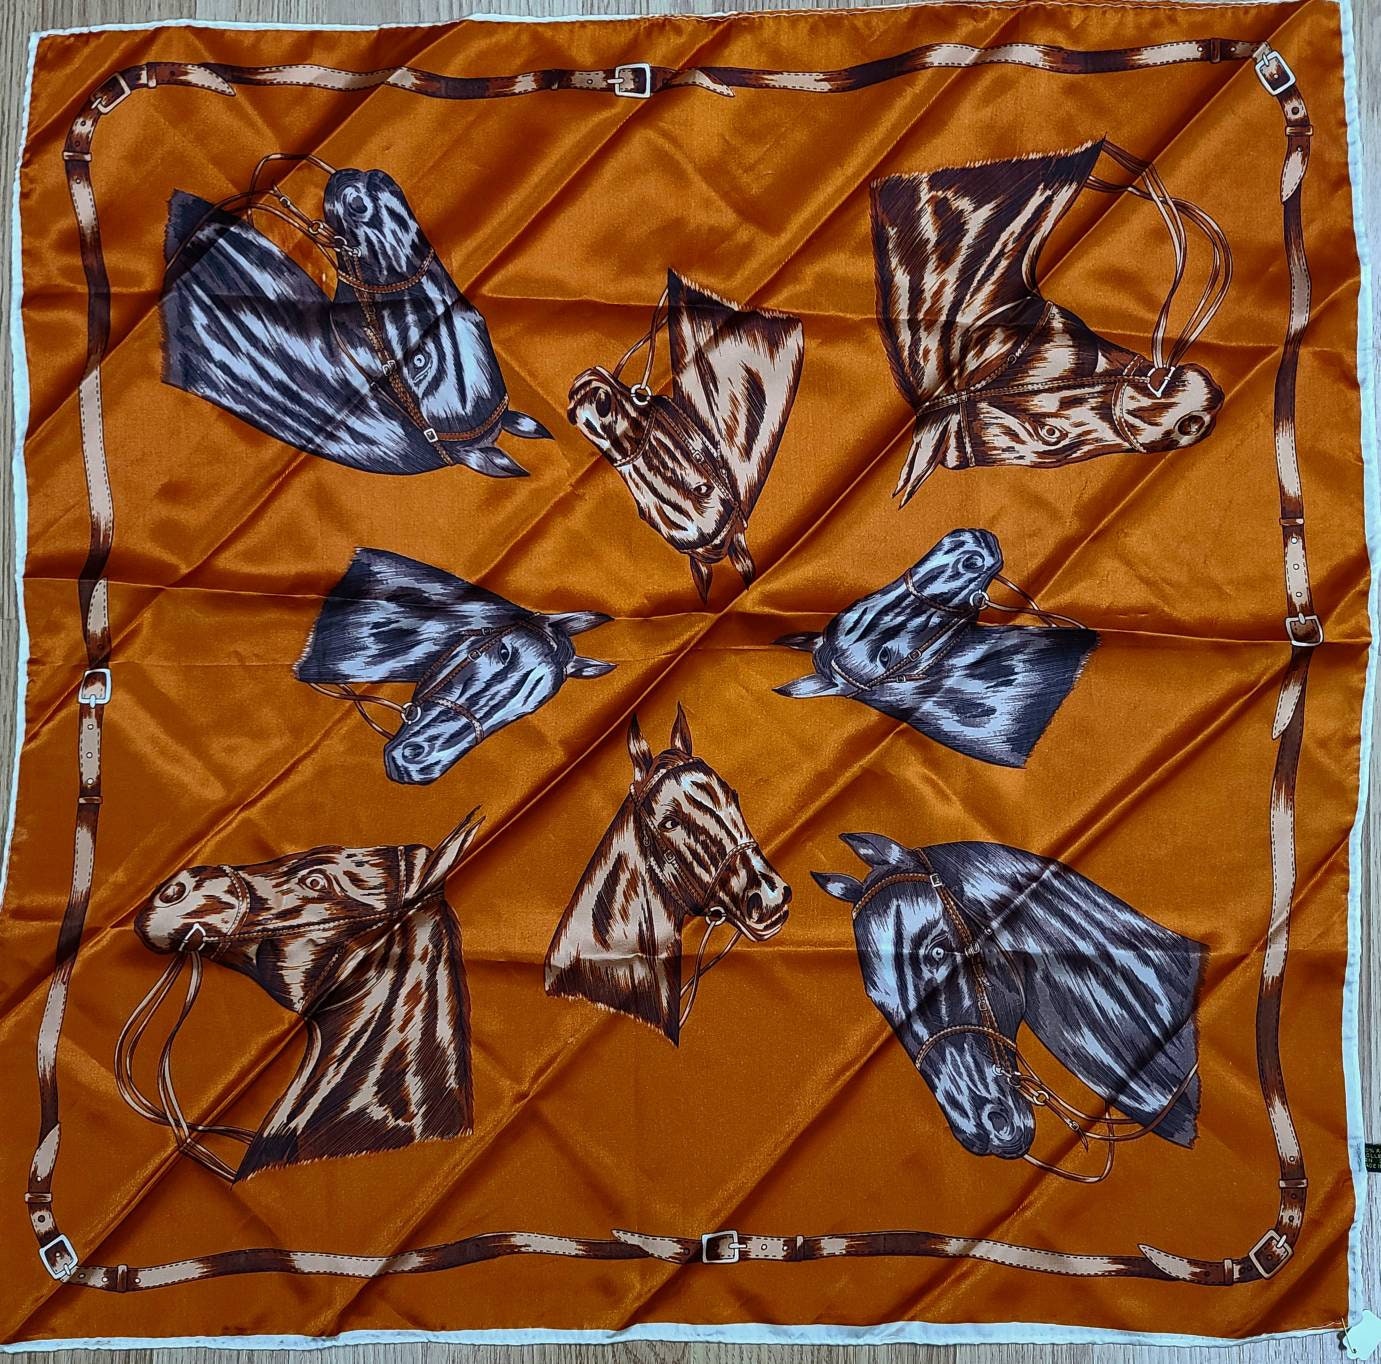 Vintage Horse Head Scarf 1960s Shiny Orange Rayon Acetate Scarf Multiple Horse Heads Rolled Edges Made in Japan Equestrian Boho 26 sq in